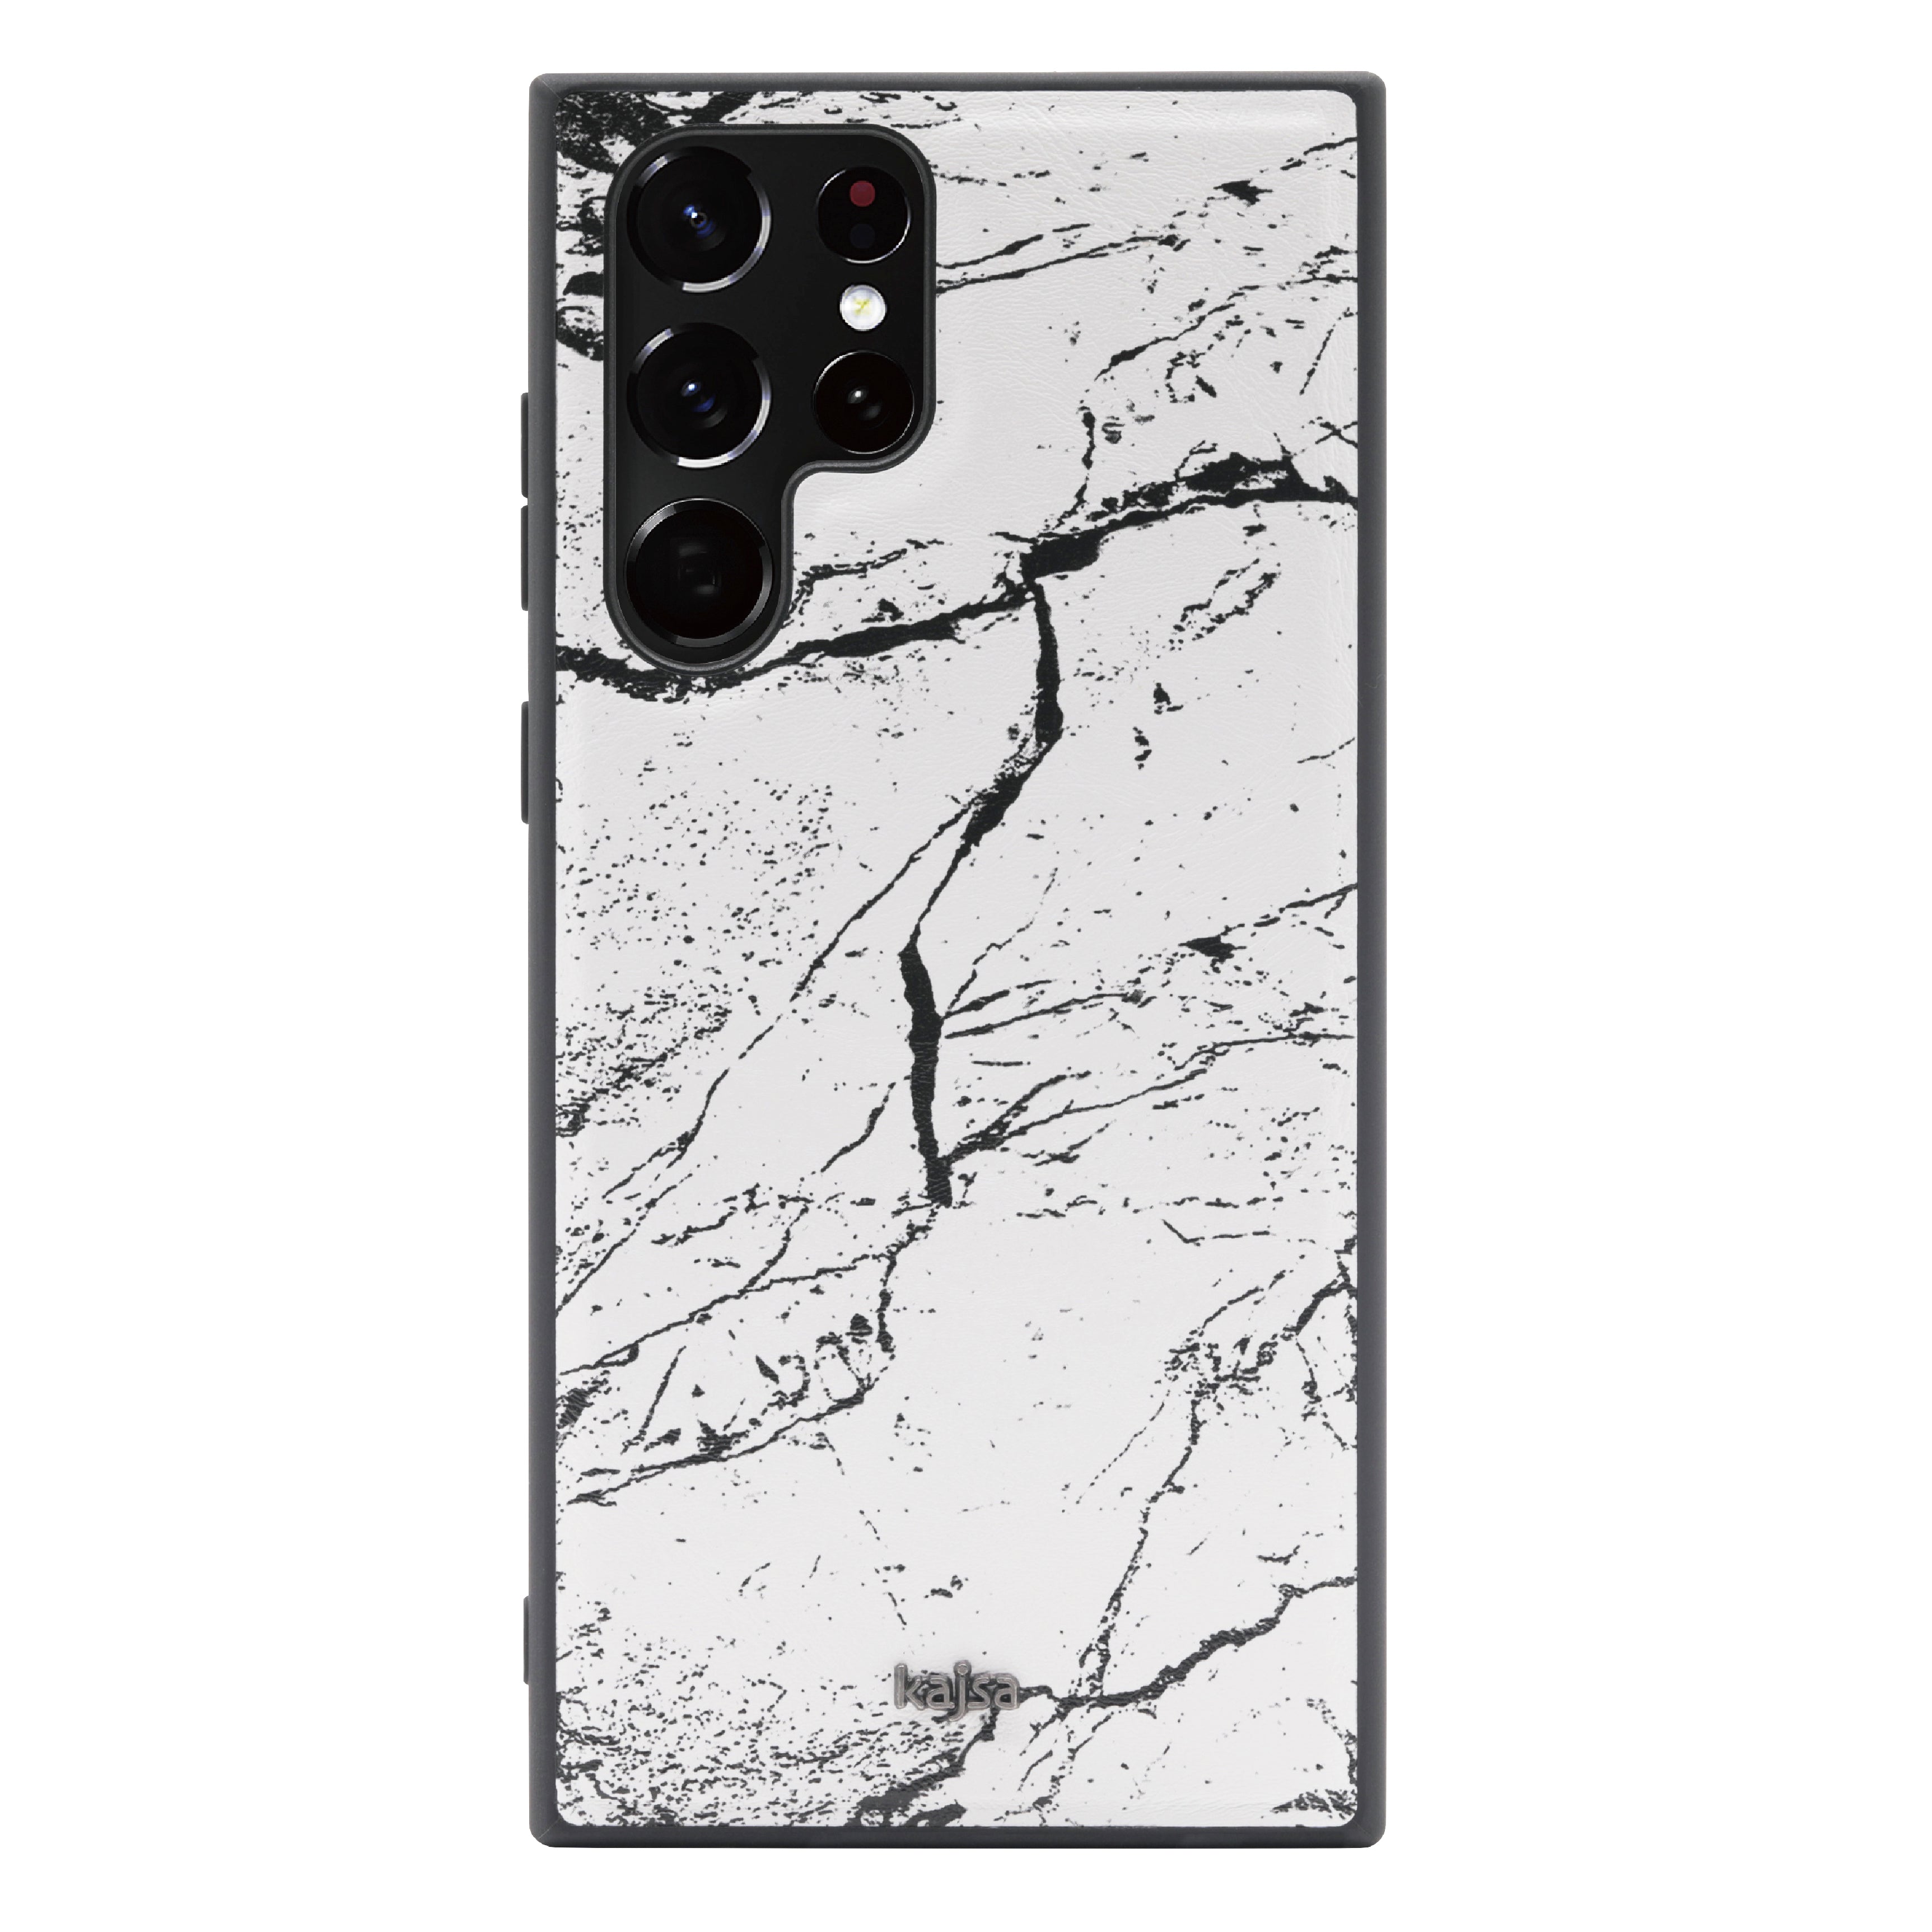 Preppie Collection - Marble PU Back Case for Samsung Galaxy S22/S22+/S22 Ultra-Phone Case- phone case - phone cases- phone cover- iphone cover- iphone case- iphone cases- leather case- leather cases- DIYCASE - custom case - leather cover - hand strap case - croco pattern case - snake pattern case - carbon fiber phone case - phone case brand - unique phone case - high quality - phone case brand - protective case - buy phone case hong kong - online buy phone case - iphone‎手機殼 - 客製化手機殼 - samsung ‎手機殼 - 香港手機殼 -